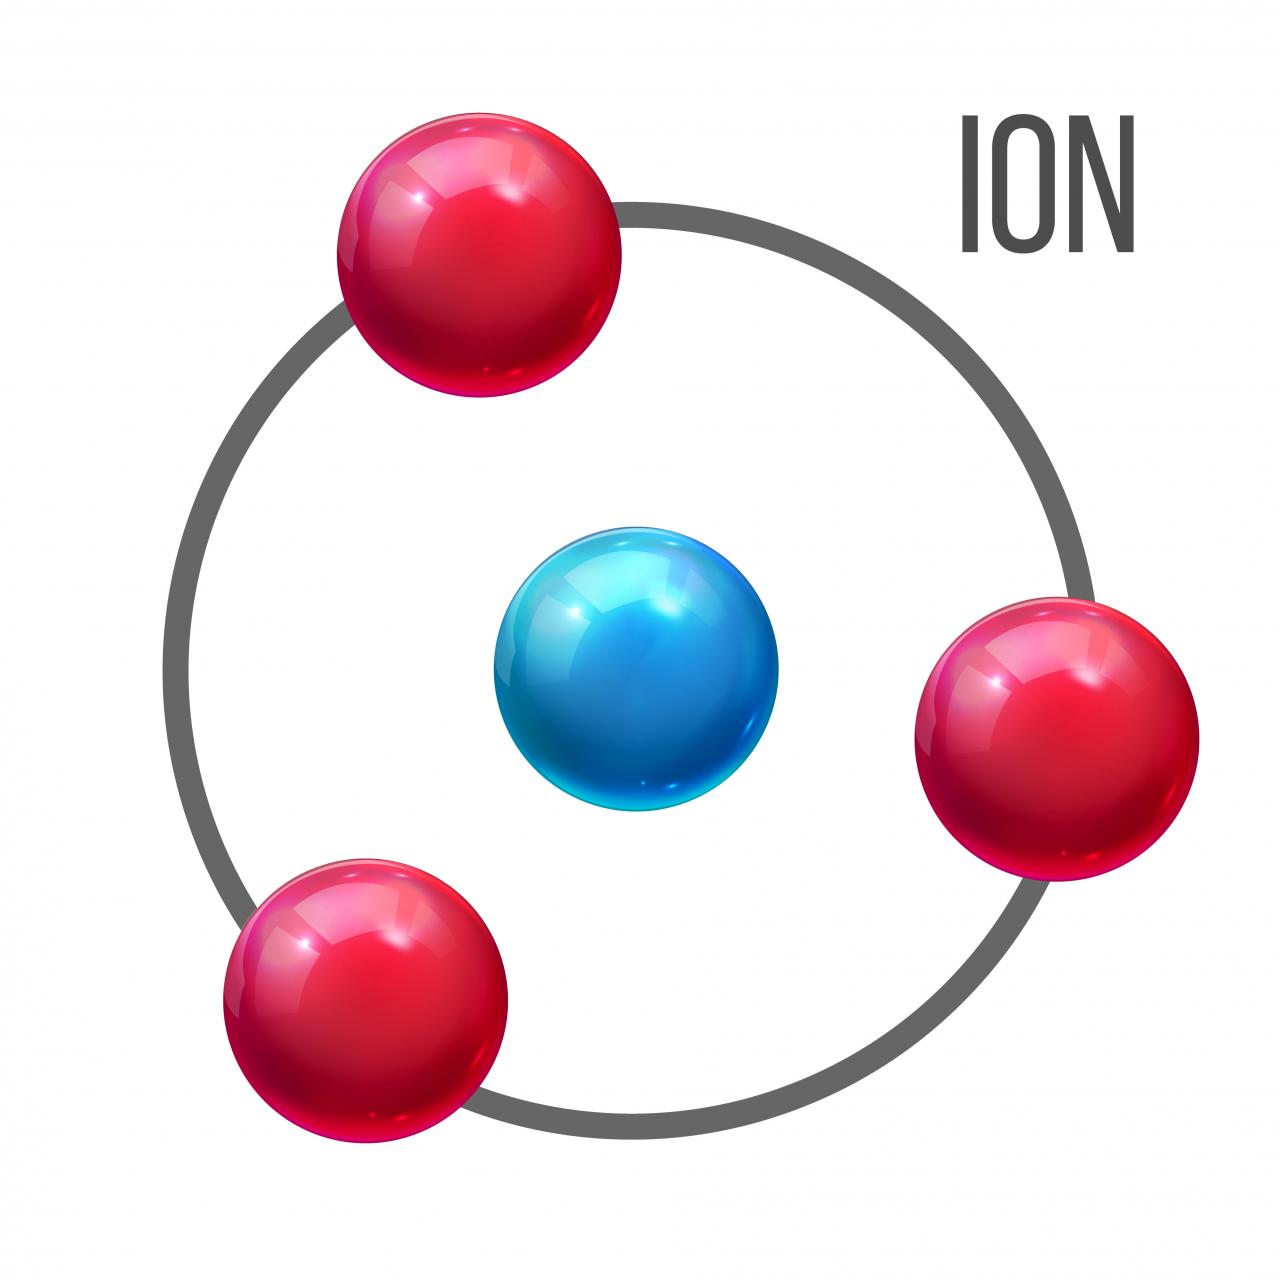 An atom or molecule with a net electrical charge